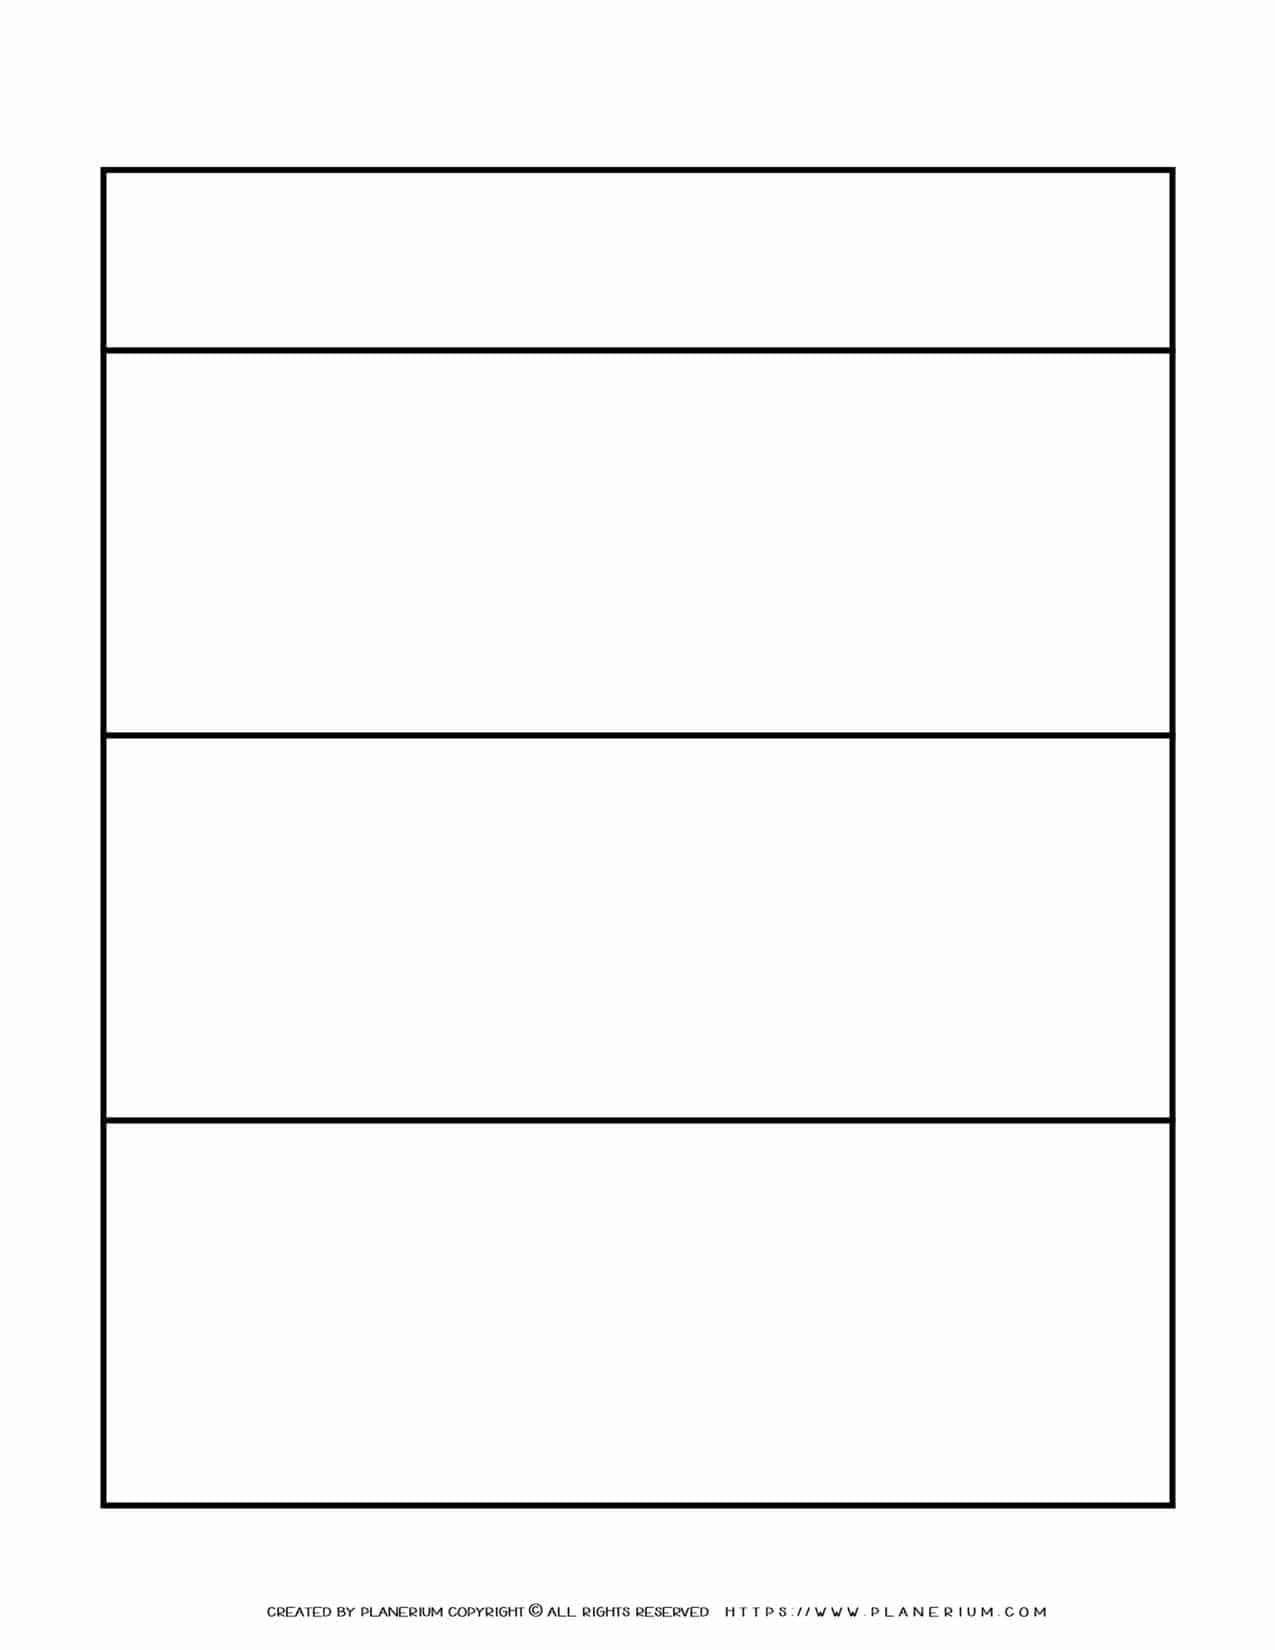 Graphic Organizer Templates - Chart with Three Rows | Planerium